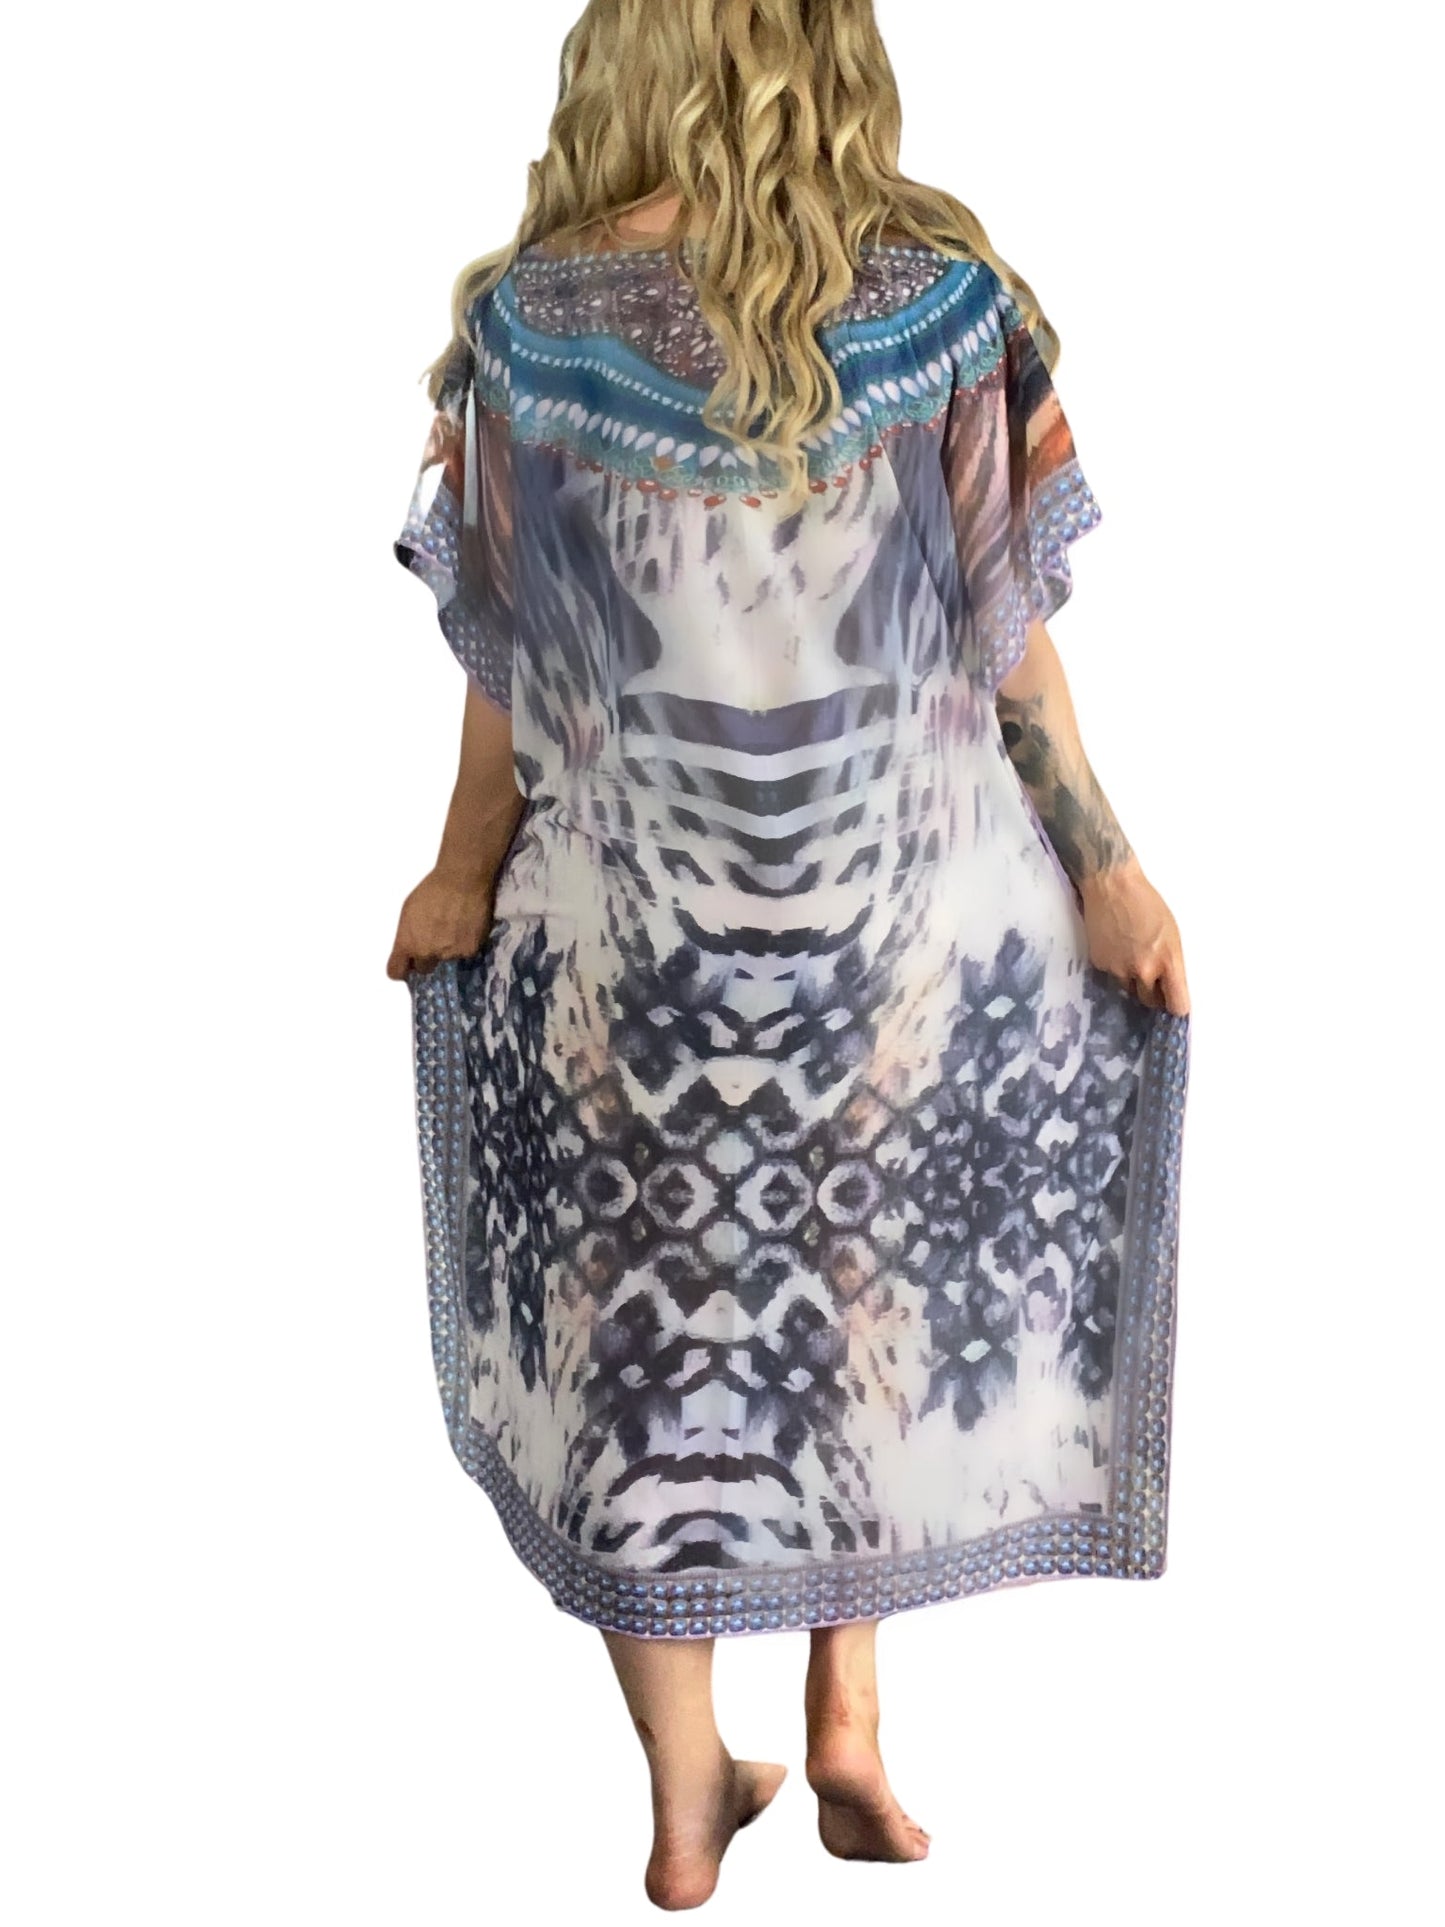 JAZZY Bejeweled Maxi Kaftan Dresses Colors - Sunset Blue Yellow, Turquoise Luxury, Country style, Grey Blue, Parrot Kaftan Dress Aambers Goodies xx 